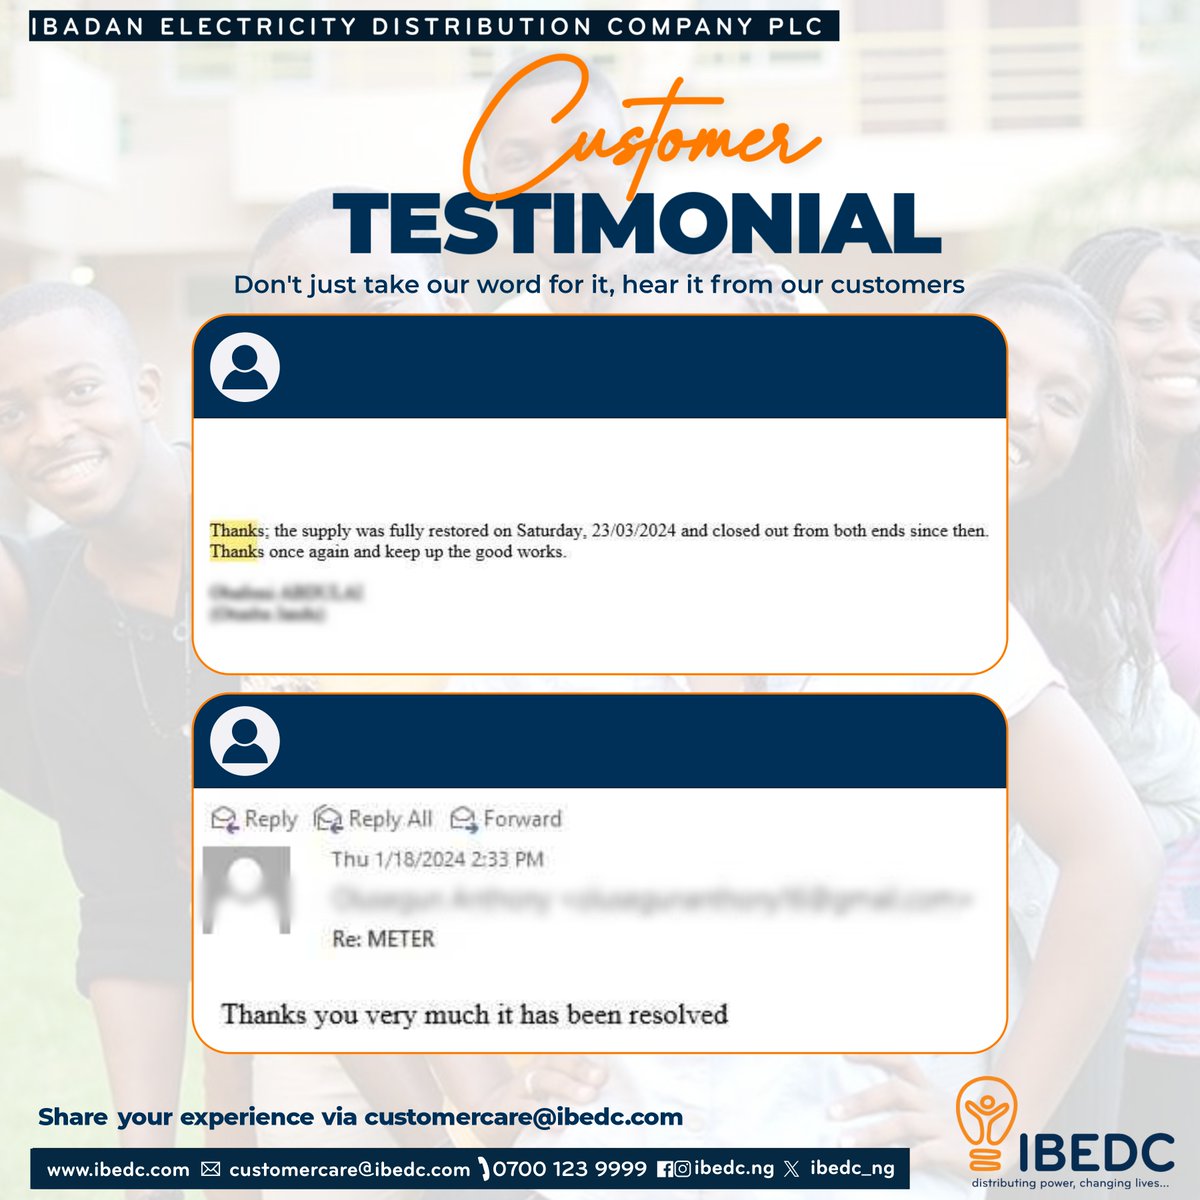 We are grateful to our incredible customers for sharing their experiences, it enables us to serve you better. #ibedc #customertestimonial #sucessstories #metering #distributingpower📷 #changinglives